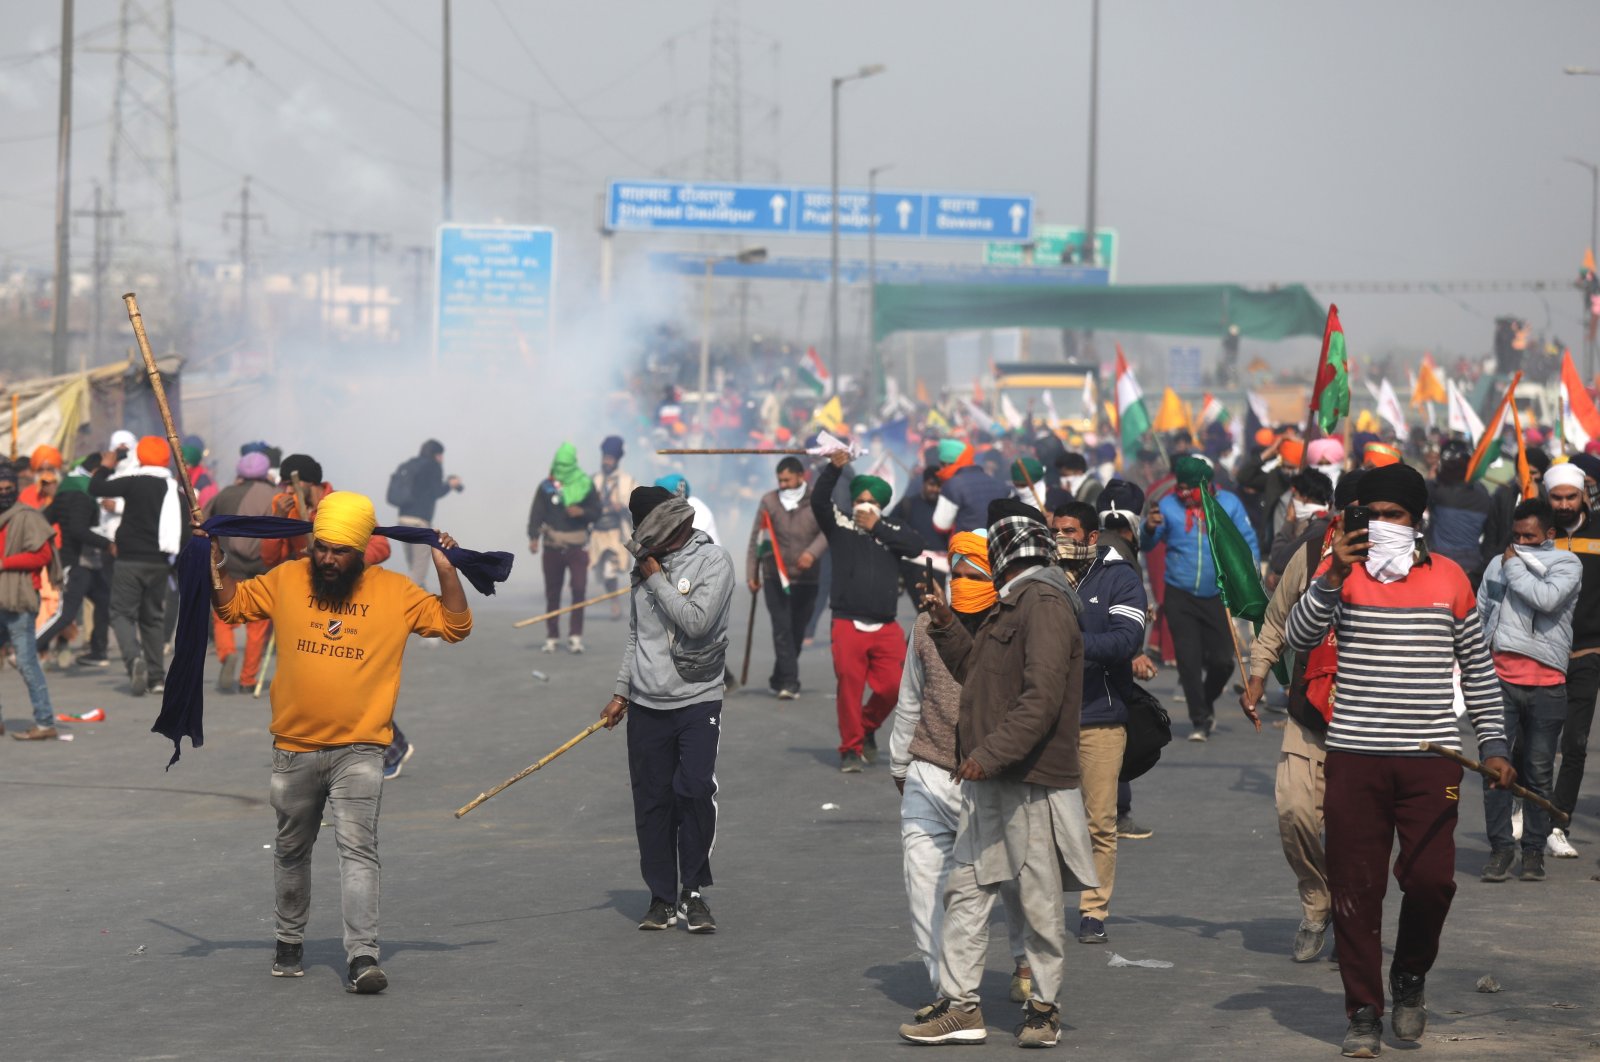 Police use tear gas against protestors during the ongoing farmers' protest of the new agricultural laws, on the outskirts of New Delhi, India, Jan. 26, 2021. (EPA Photo)